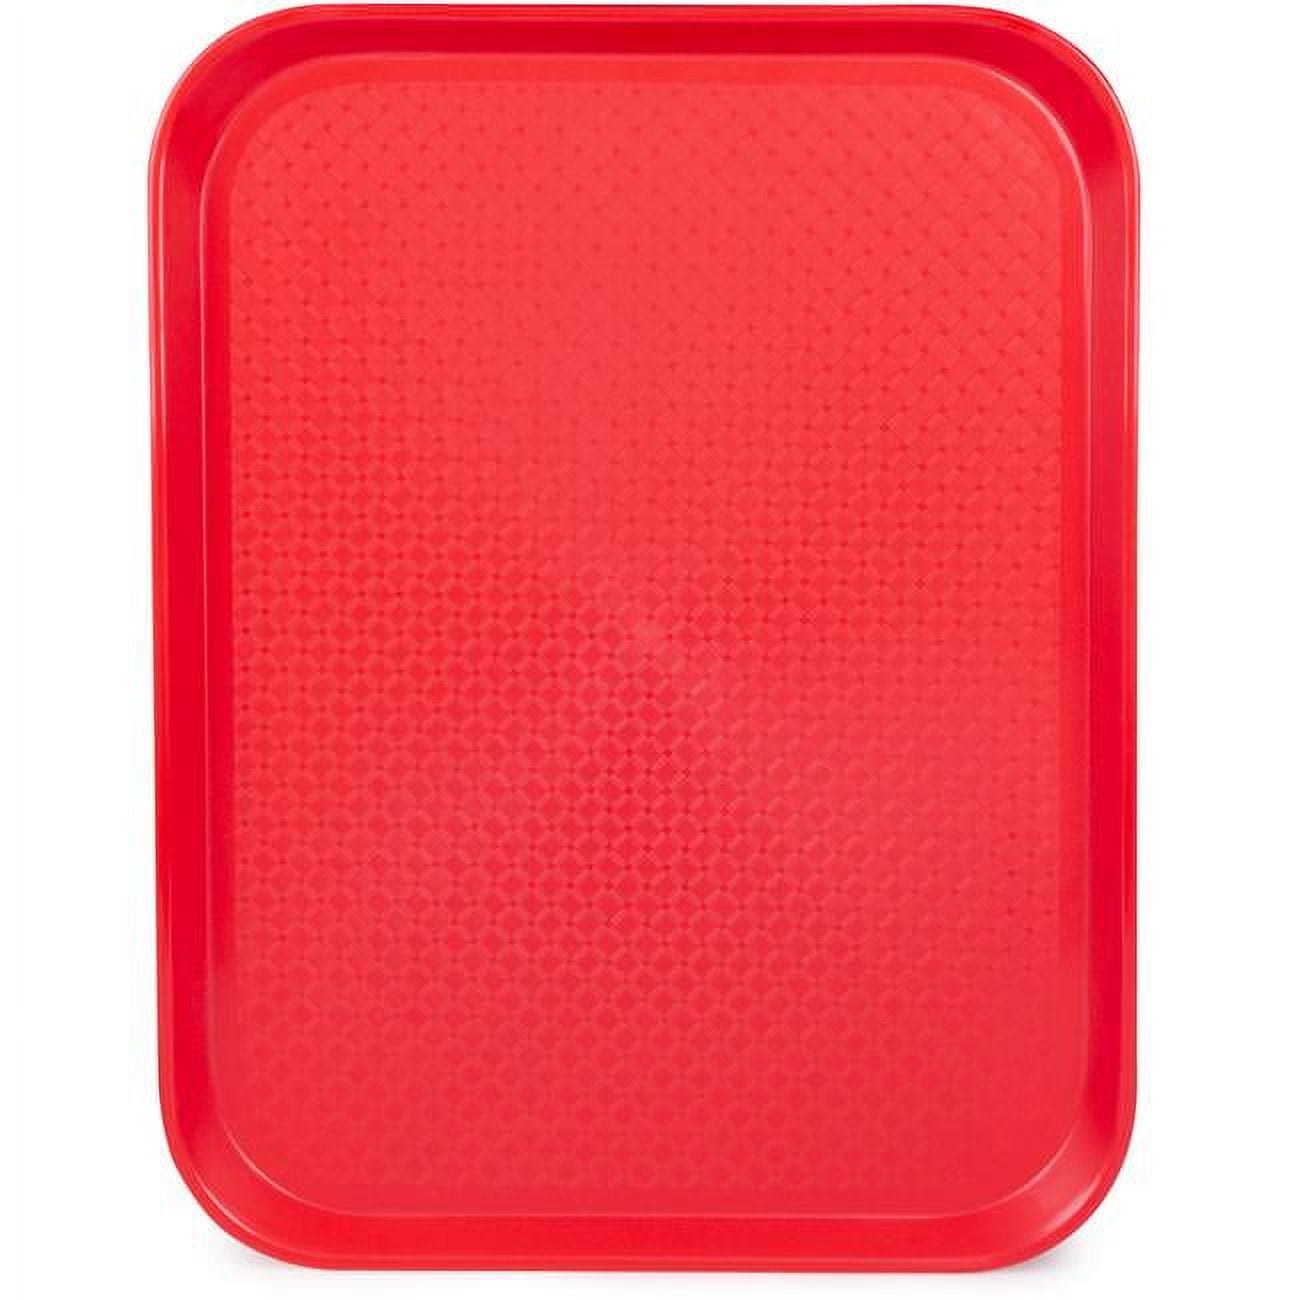 Kcaf-303 14 X 18 In. Fast Food Cafeteria Tray, Red